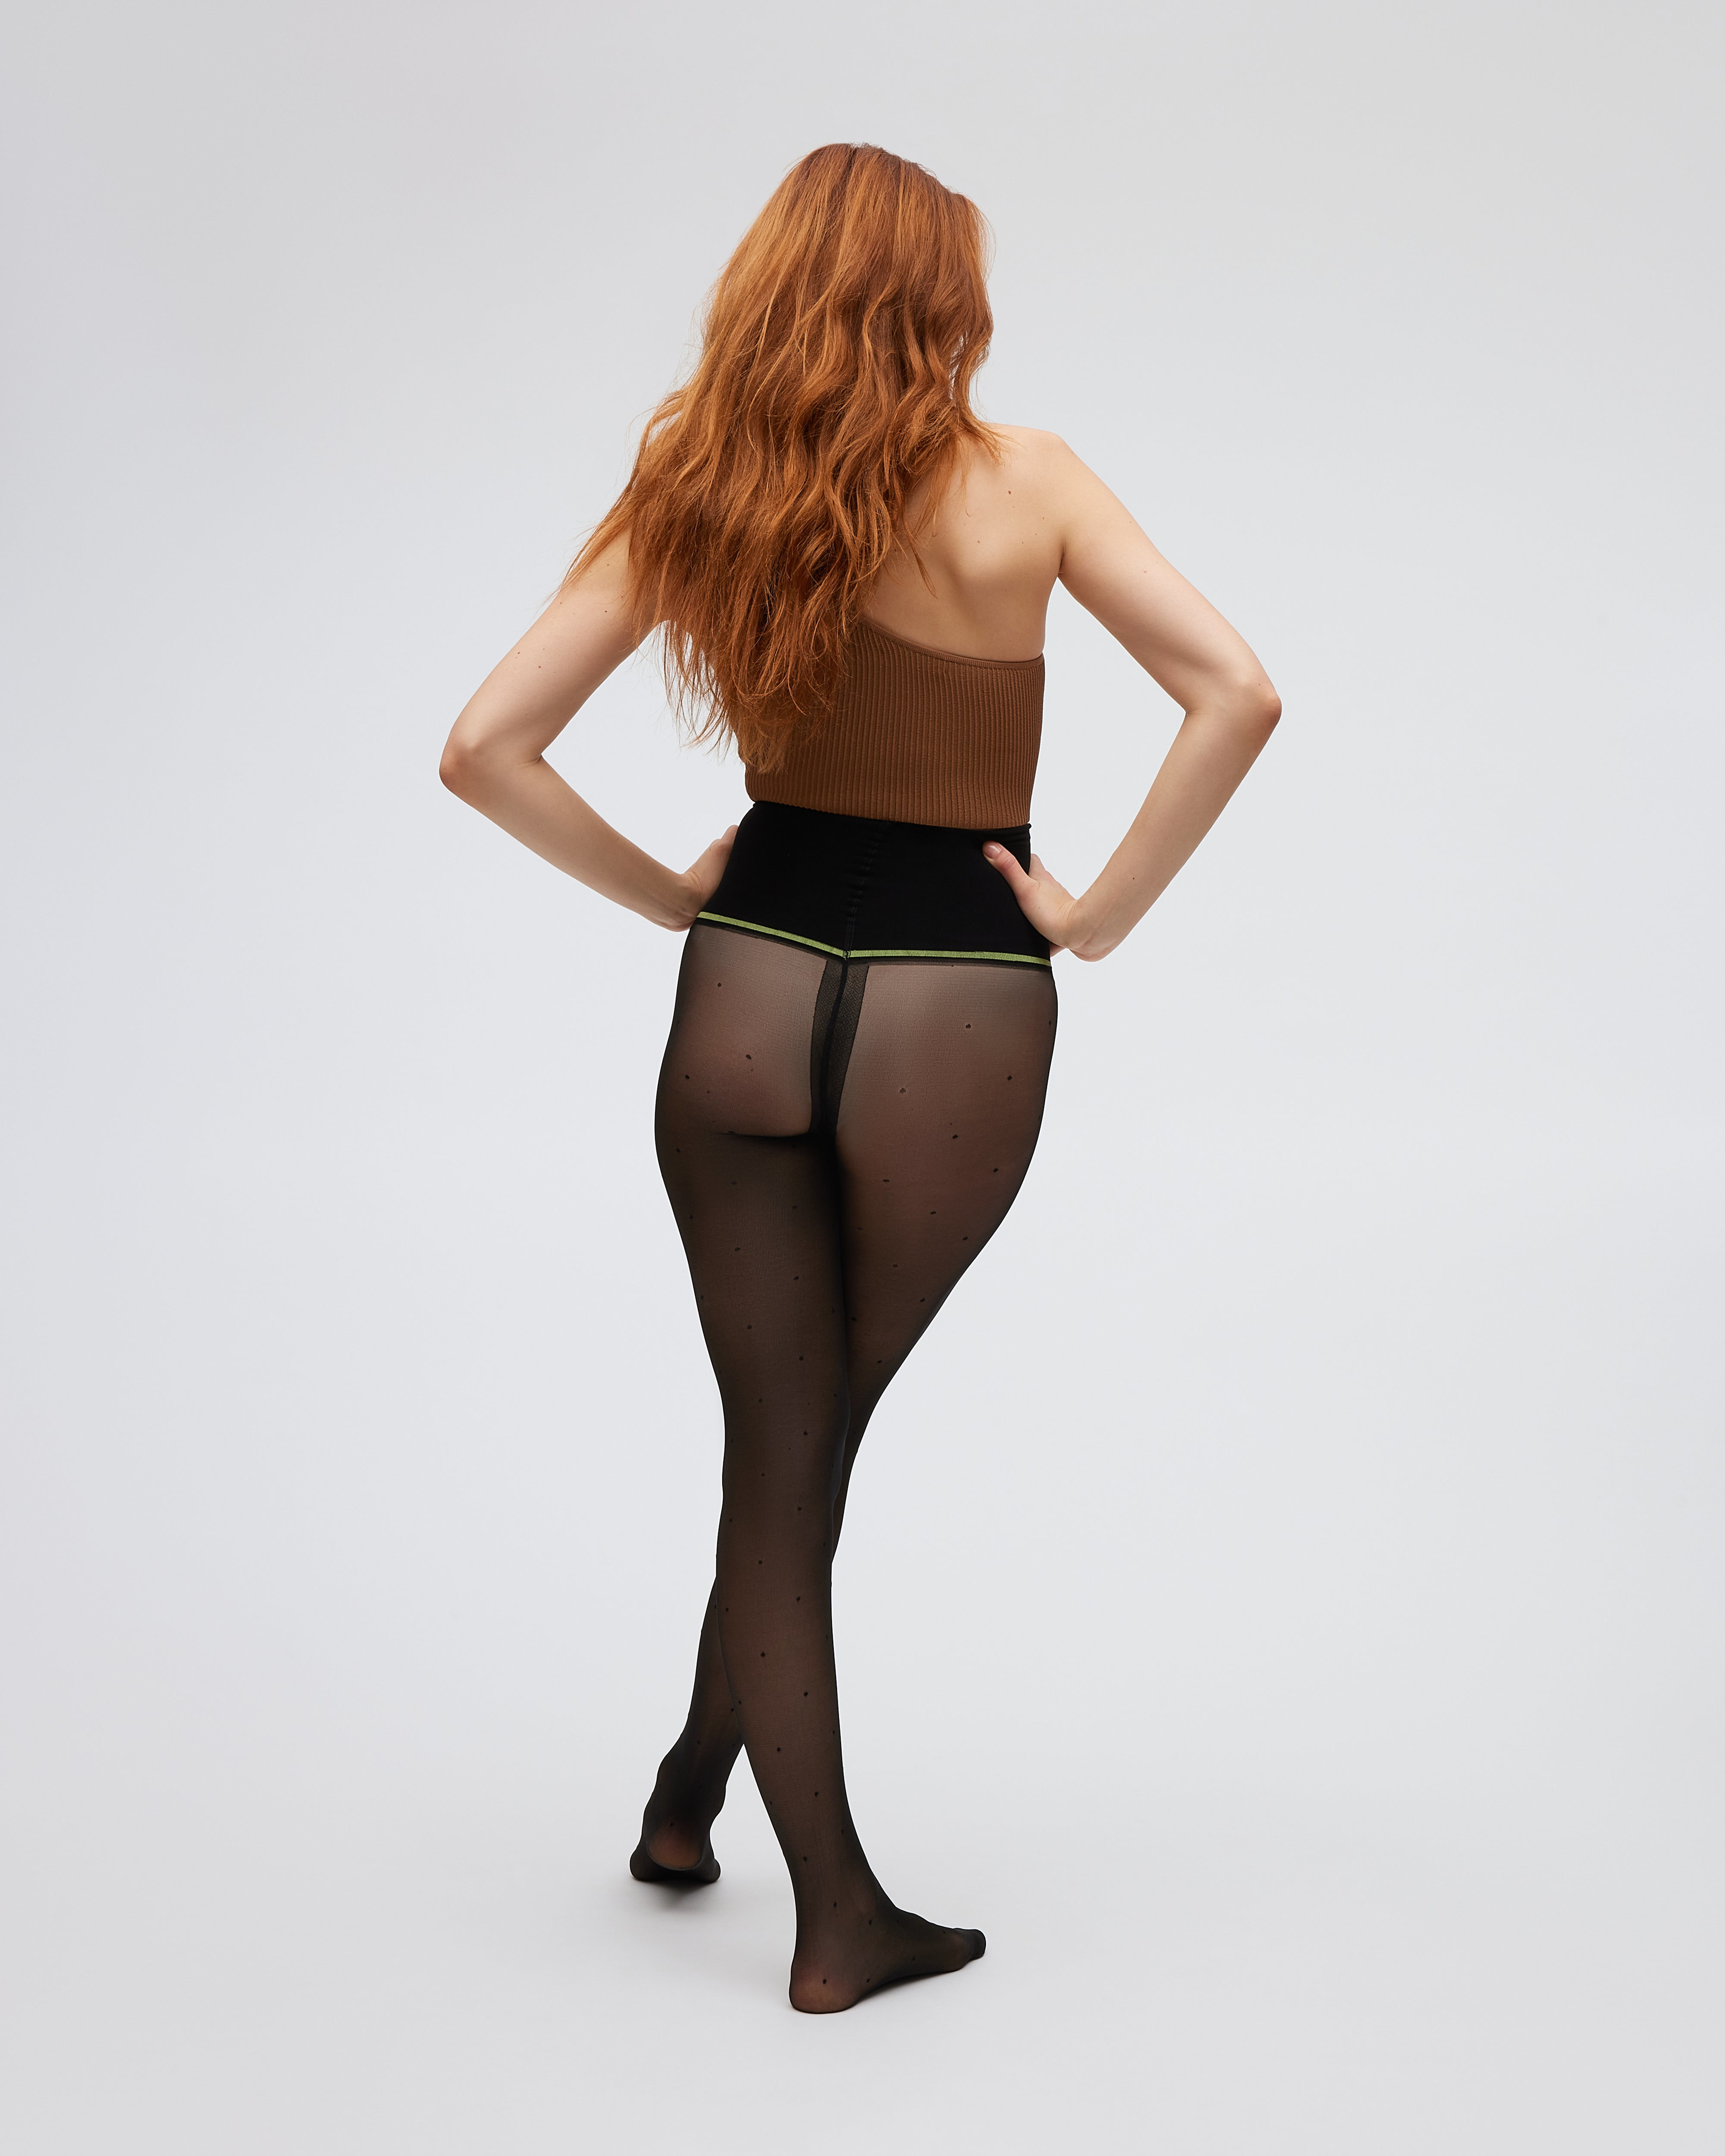 null, Mini Dot Super Sheer Rip-Resist Tights, micro-dot-super-sheer-rip-resist-tights, sheertex, product image, unbreakable tights, model